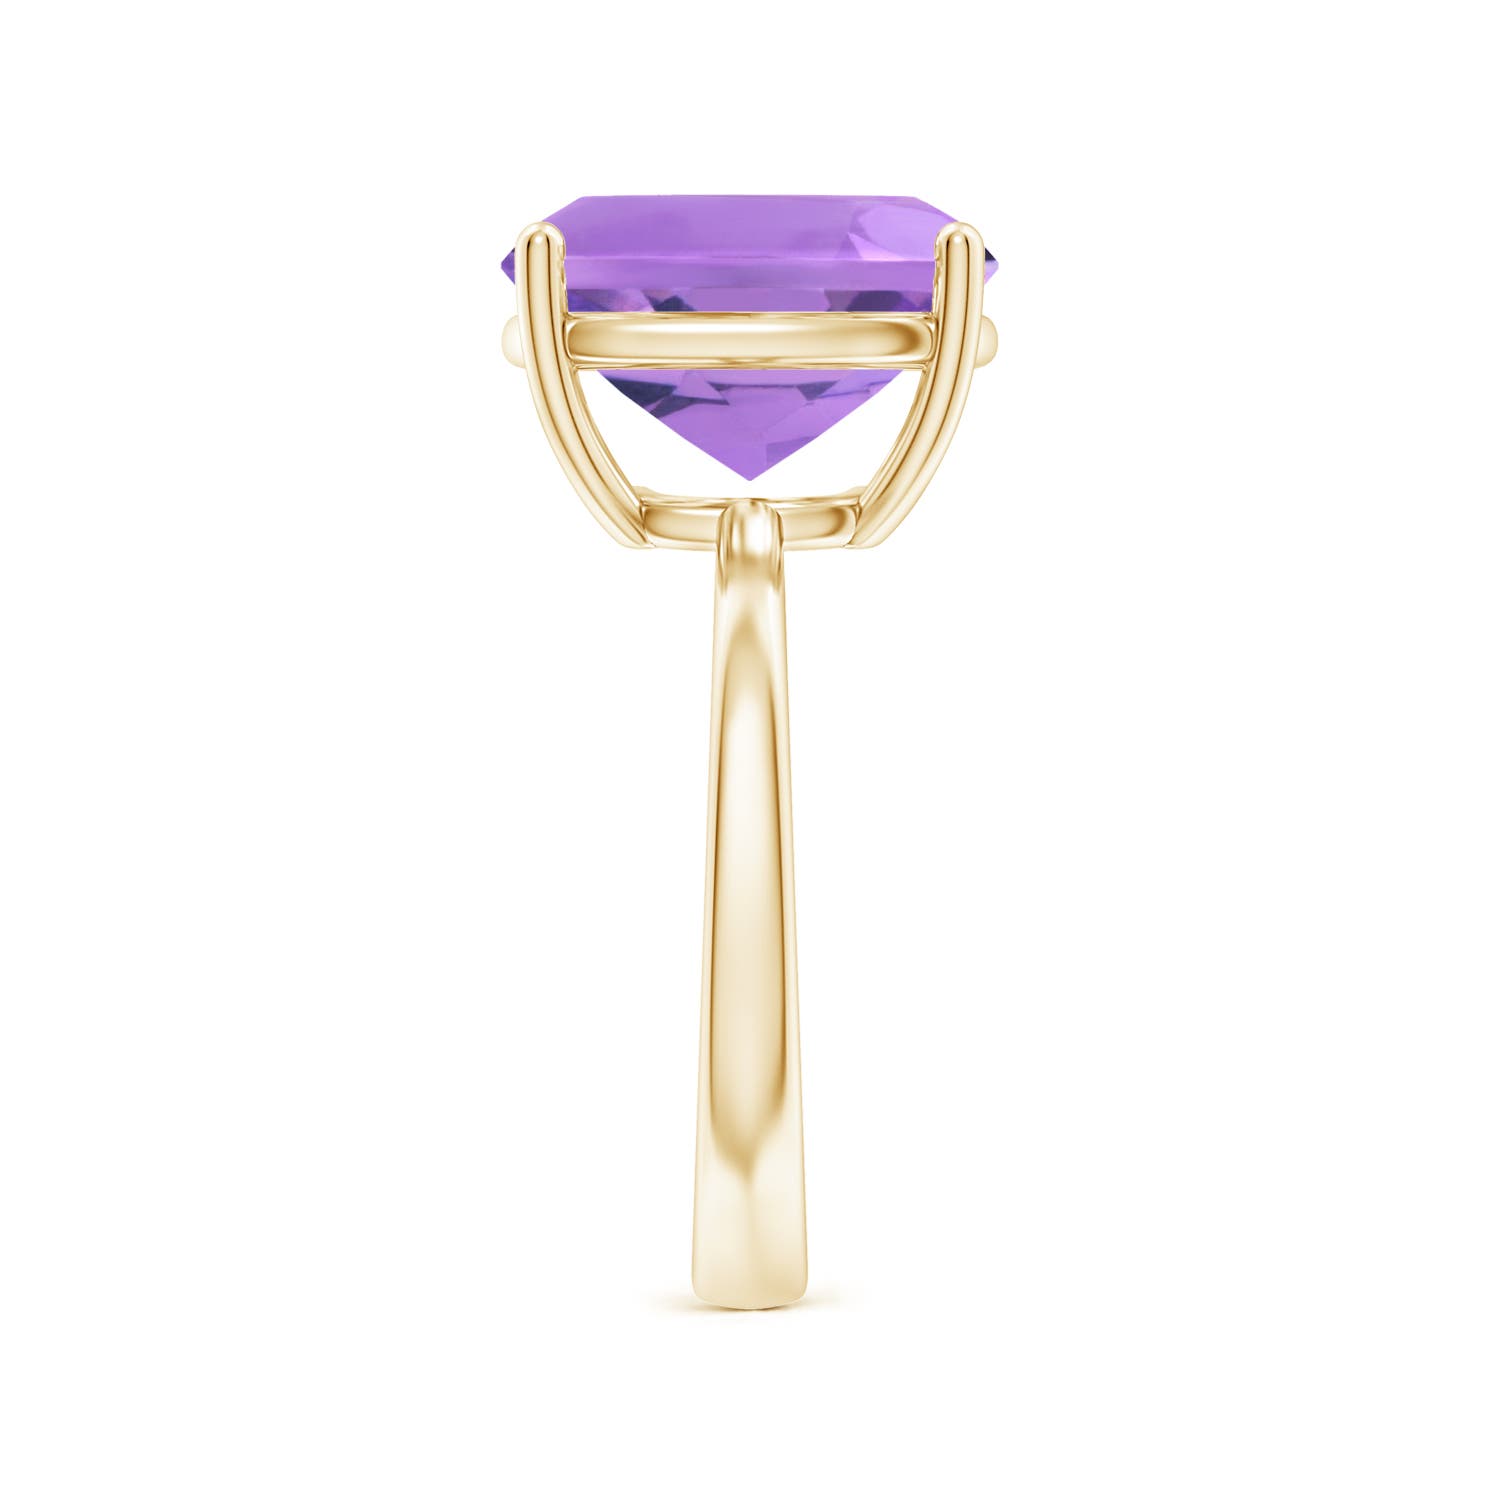 A - Amethyst / 4.6 CT / 14 KT Yellow Gold